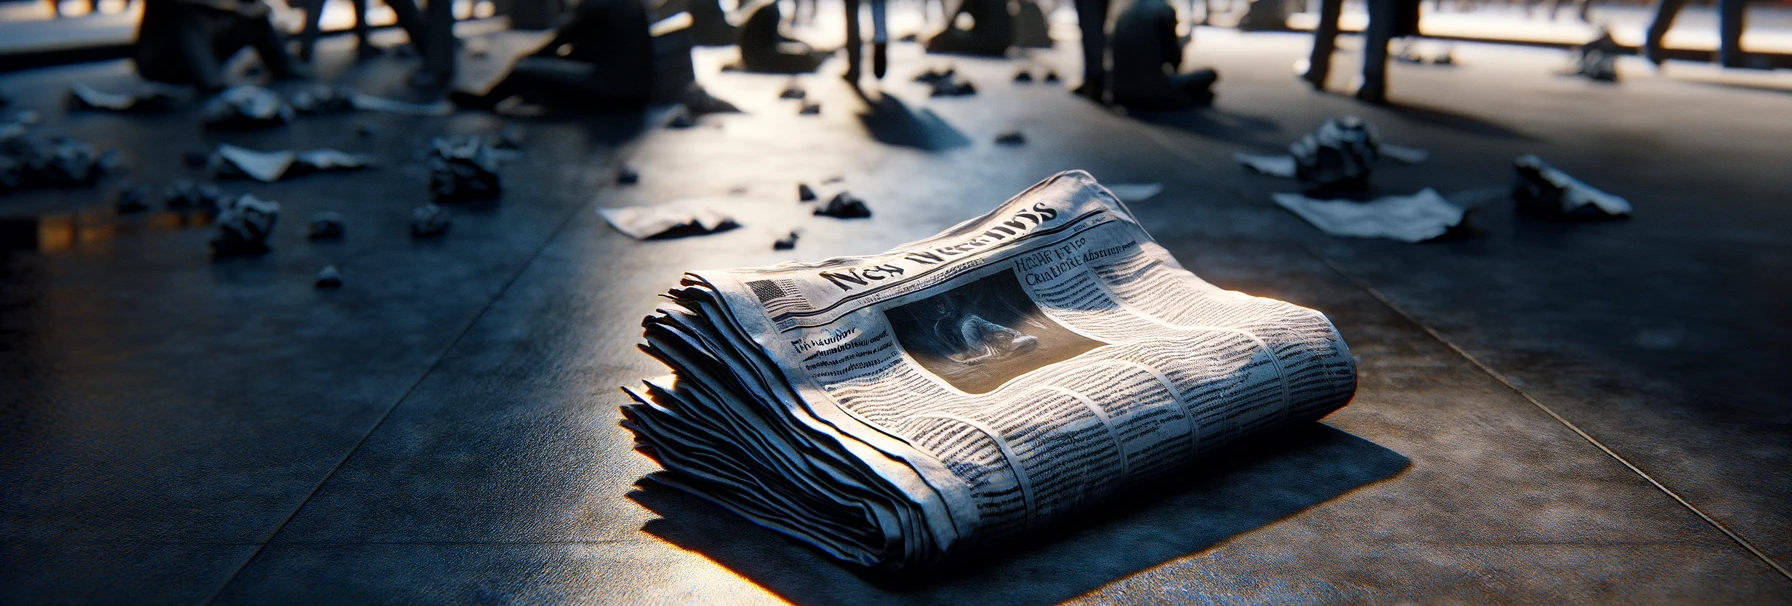 Growing information disconnection: 37% avoid news, eight points more than in 2023